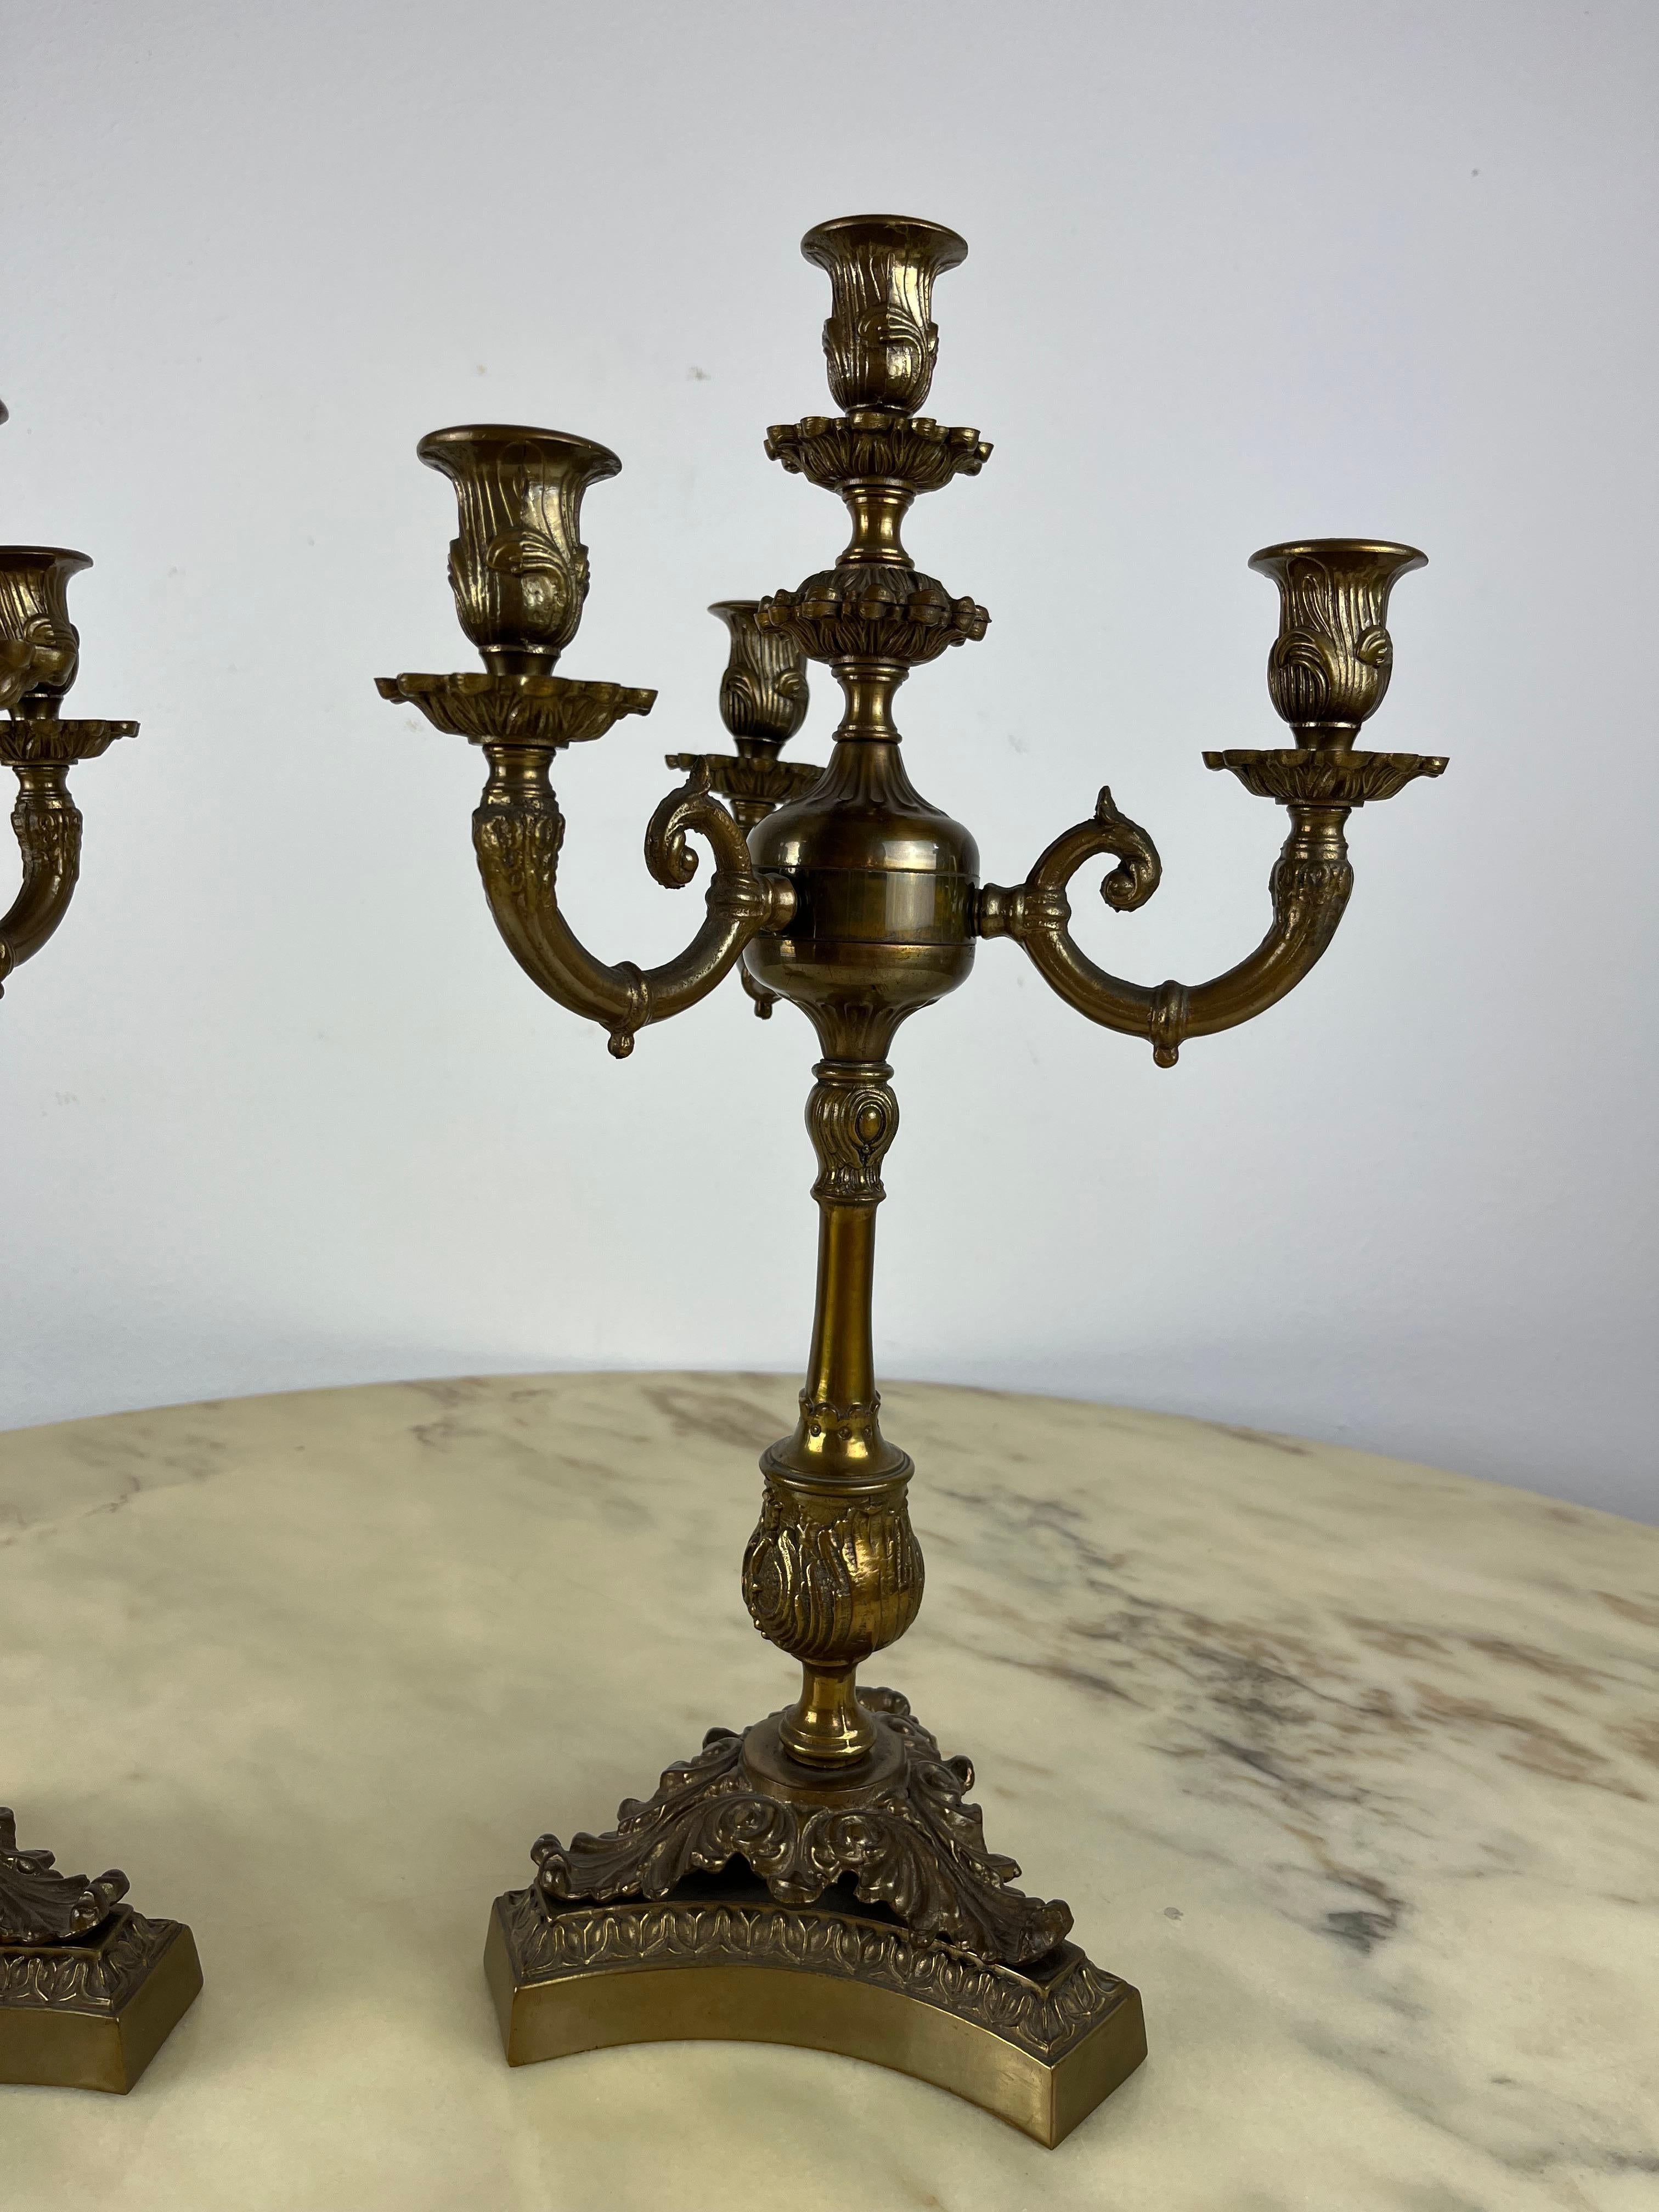 Pair of bronze candelabra, Italy, 1960s.
Four flames, found in a noble apartment.
Barely used, they are in excellent condition considering their age.